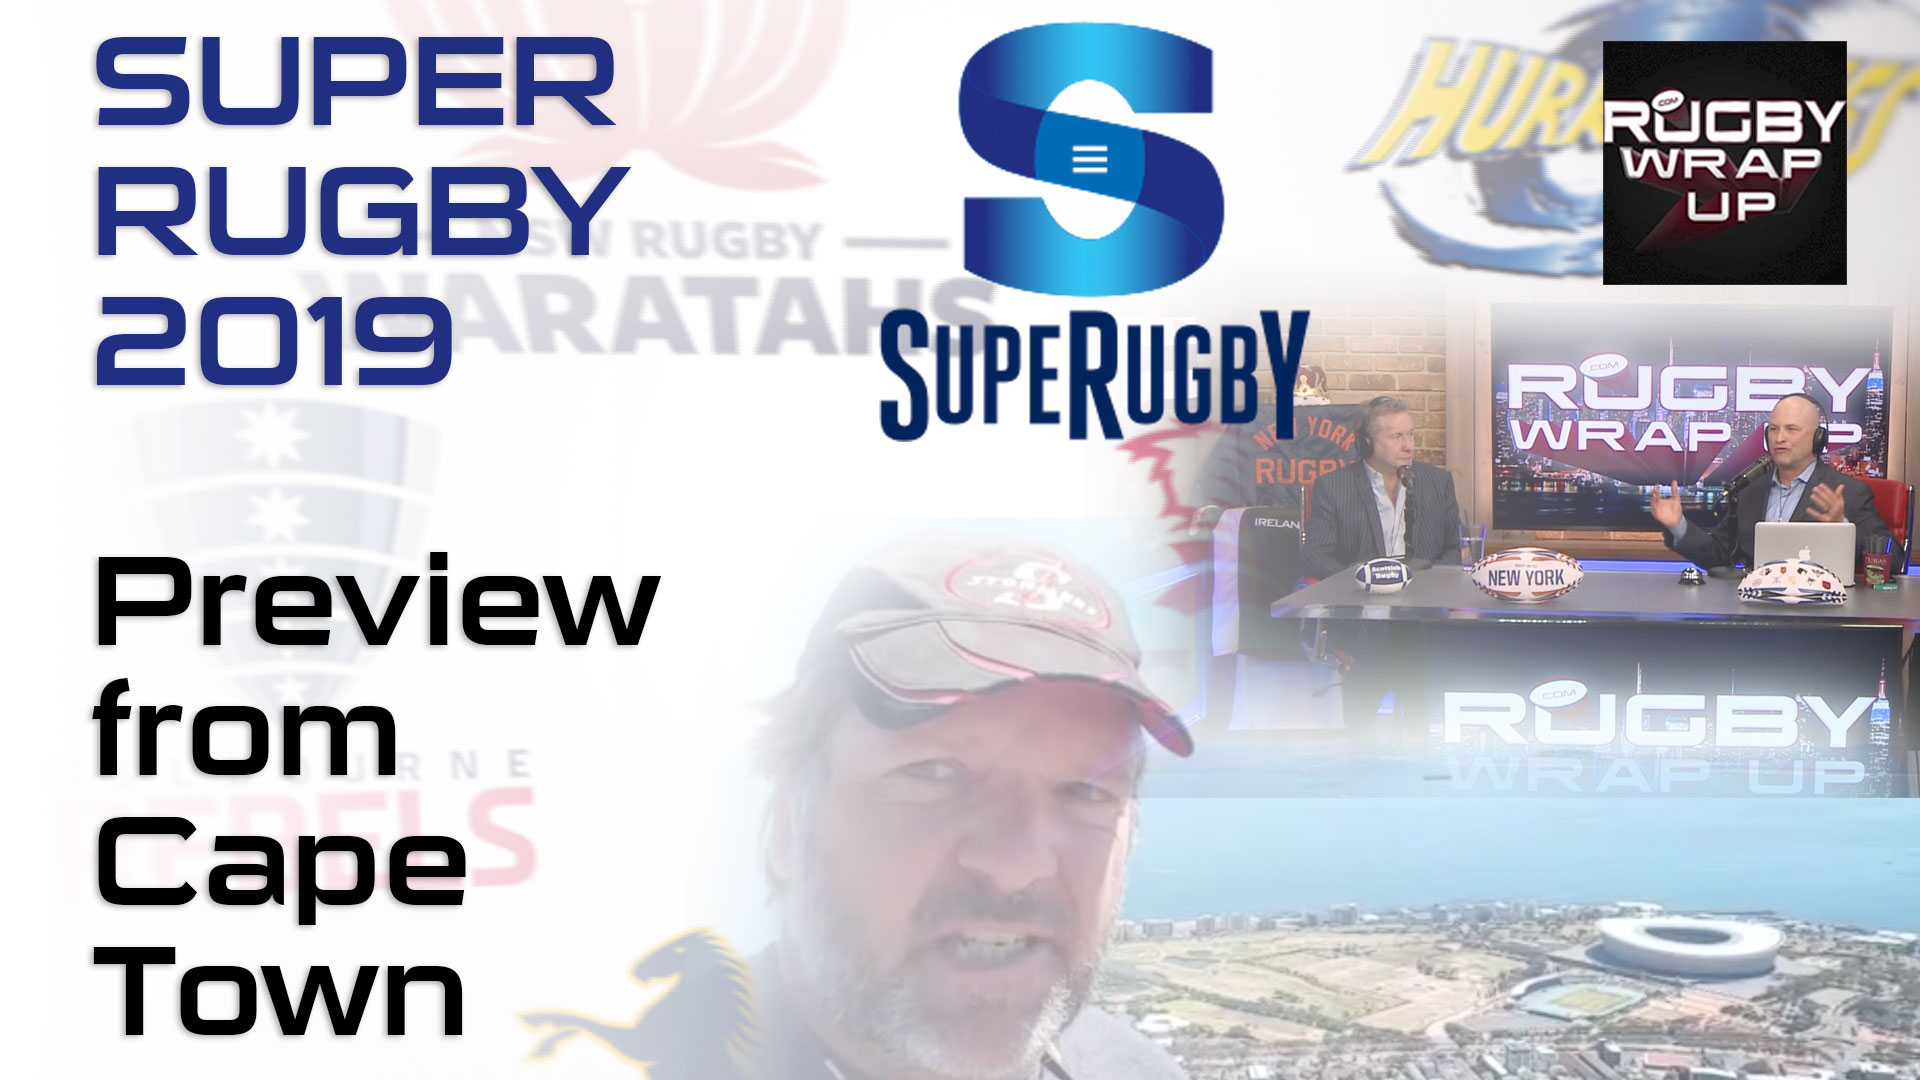 Super Rugby Preview, Super Heroes Play Rugby, Rugby_Wrap_Up